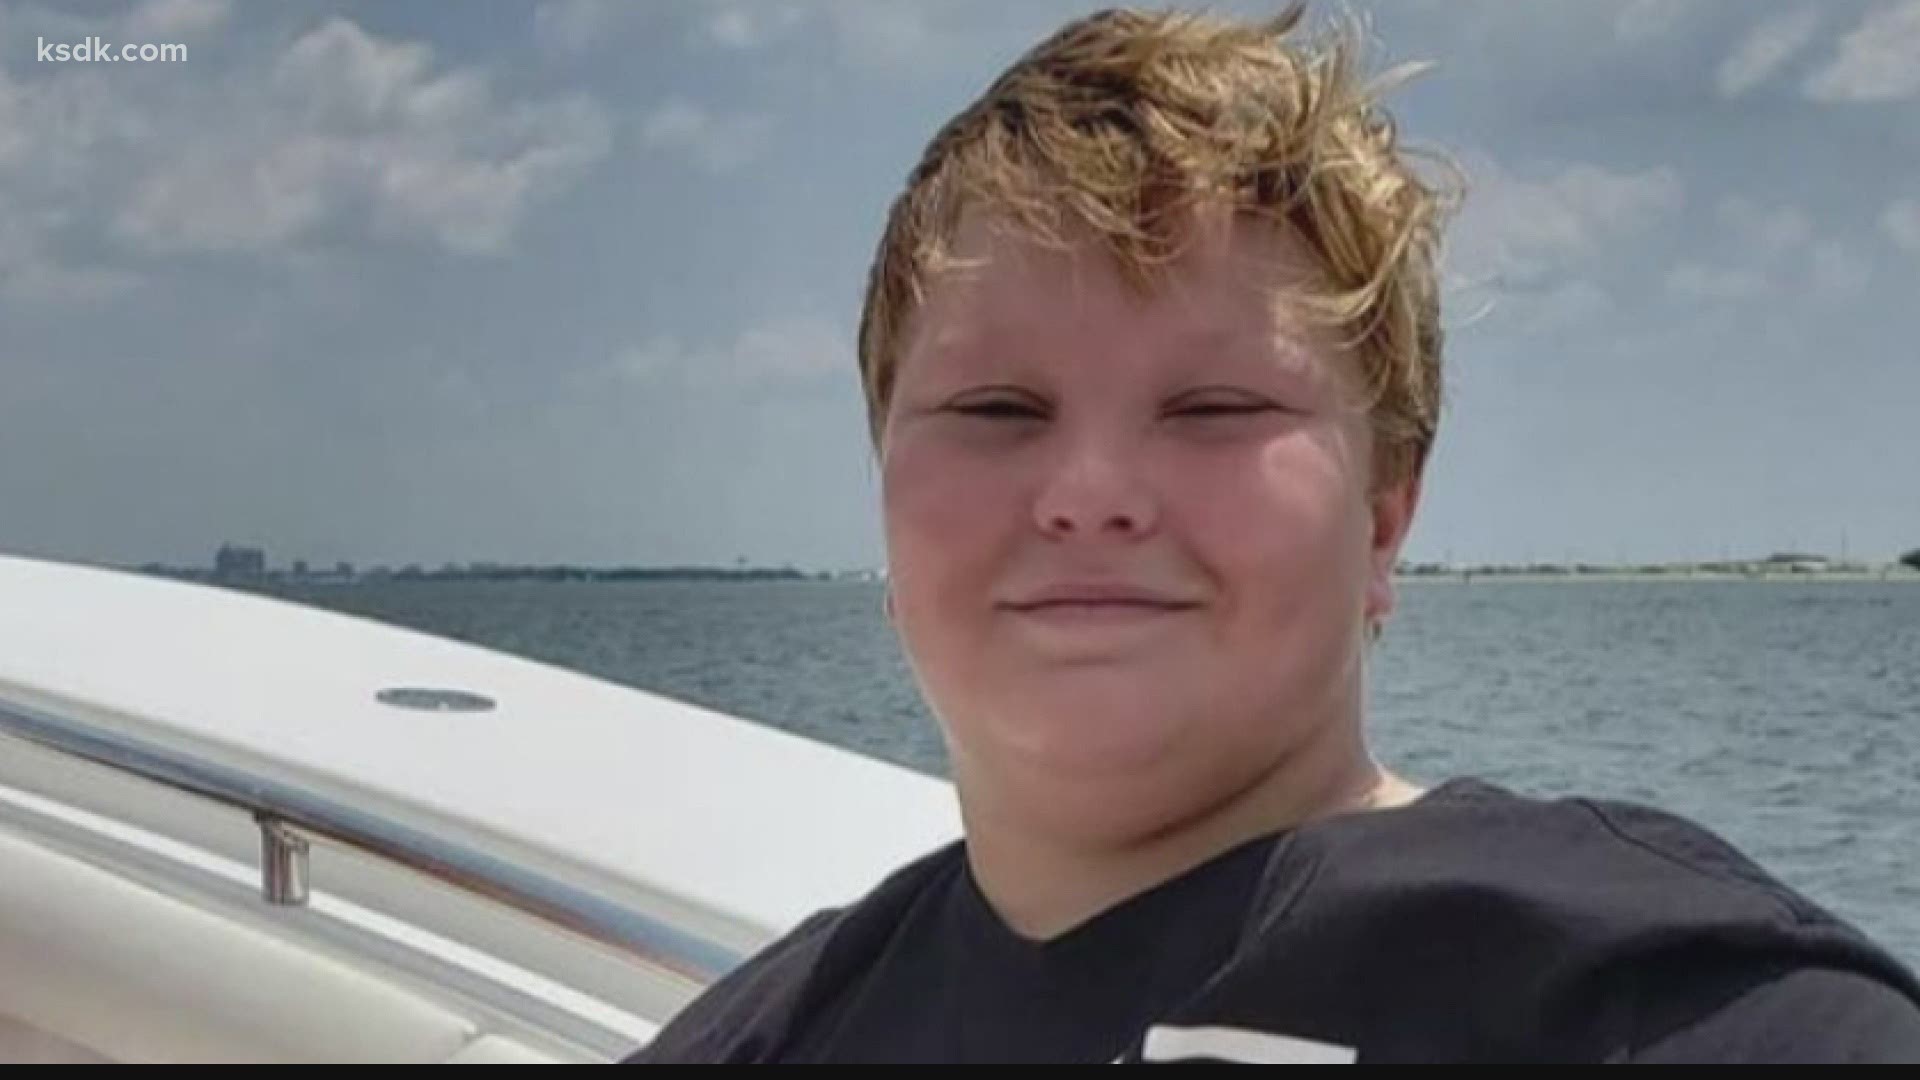 Peyton Baumgarth is the youngest person in the state of Missouri to die of COVID-19.